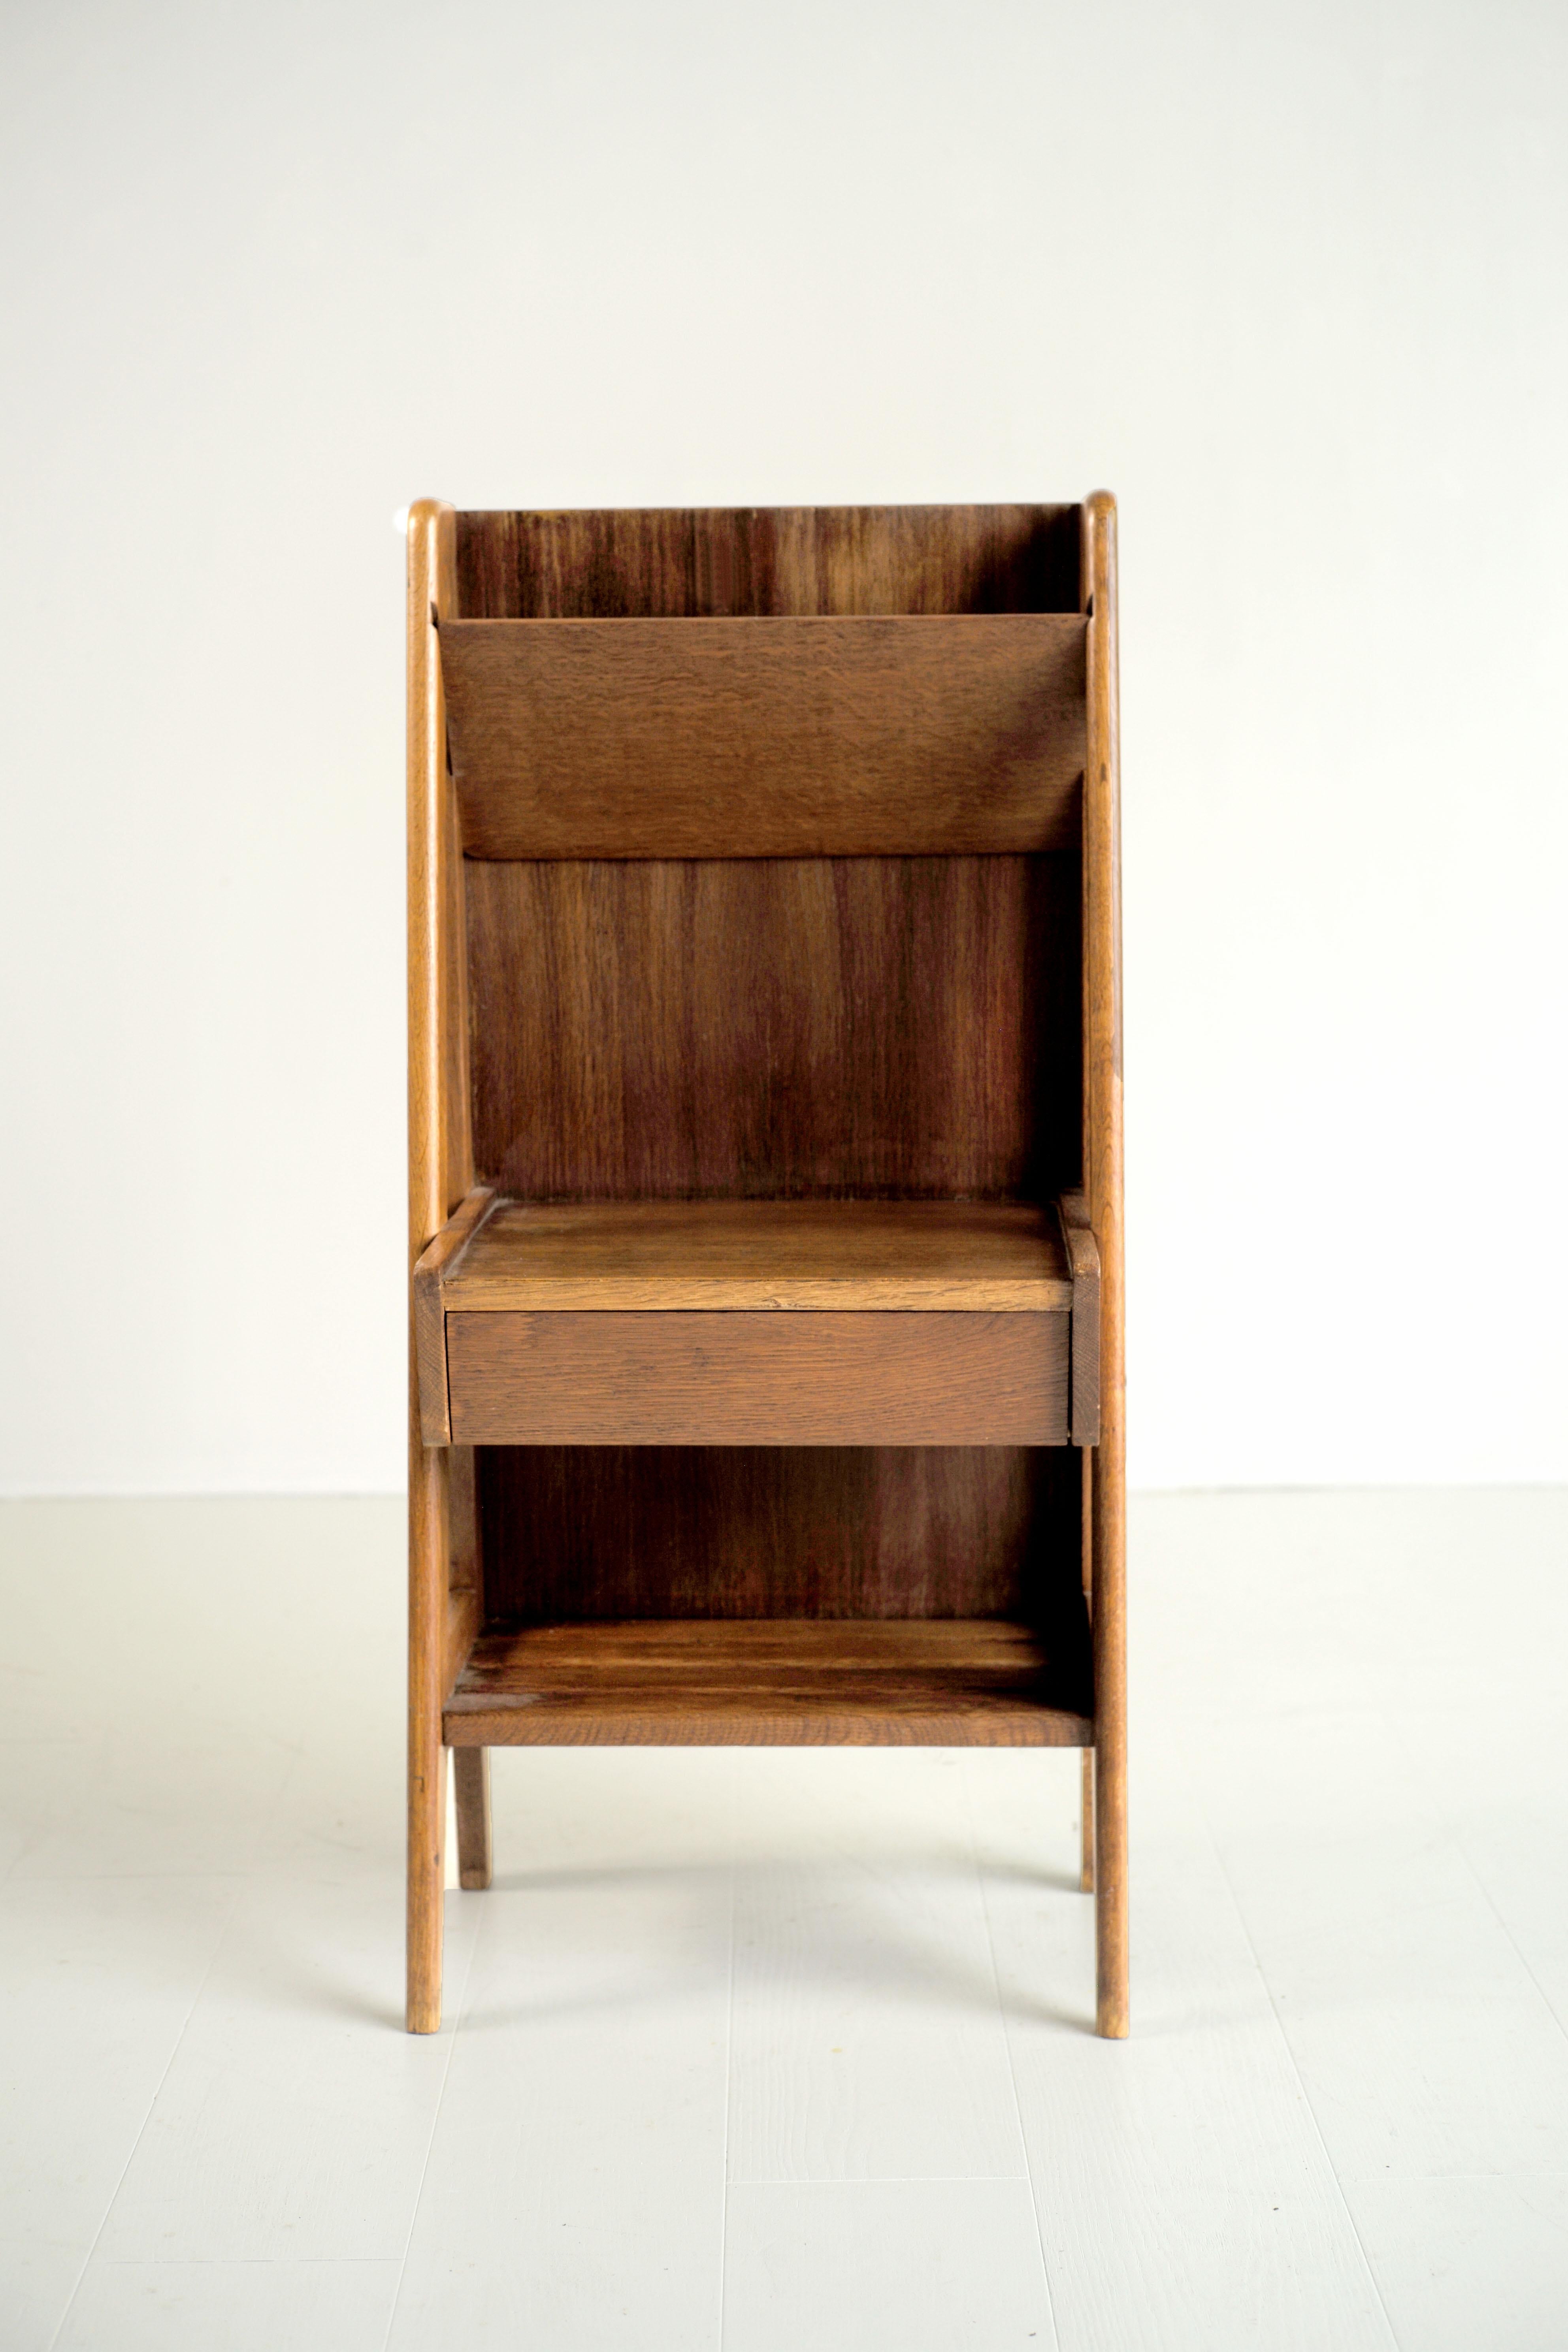 Occasional oak furniture dating from the French Reconstruction, 1950. On a compass base is positioned a drawer unit, topped with a newspaper compartment. At the base is a slatted shelf. As interesting in its design as in its ingenuity, this piece of